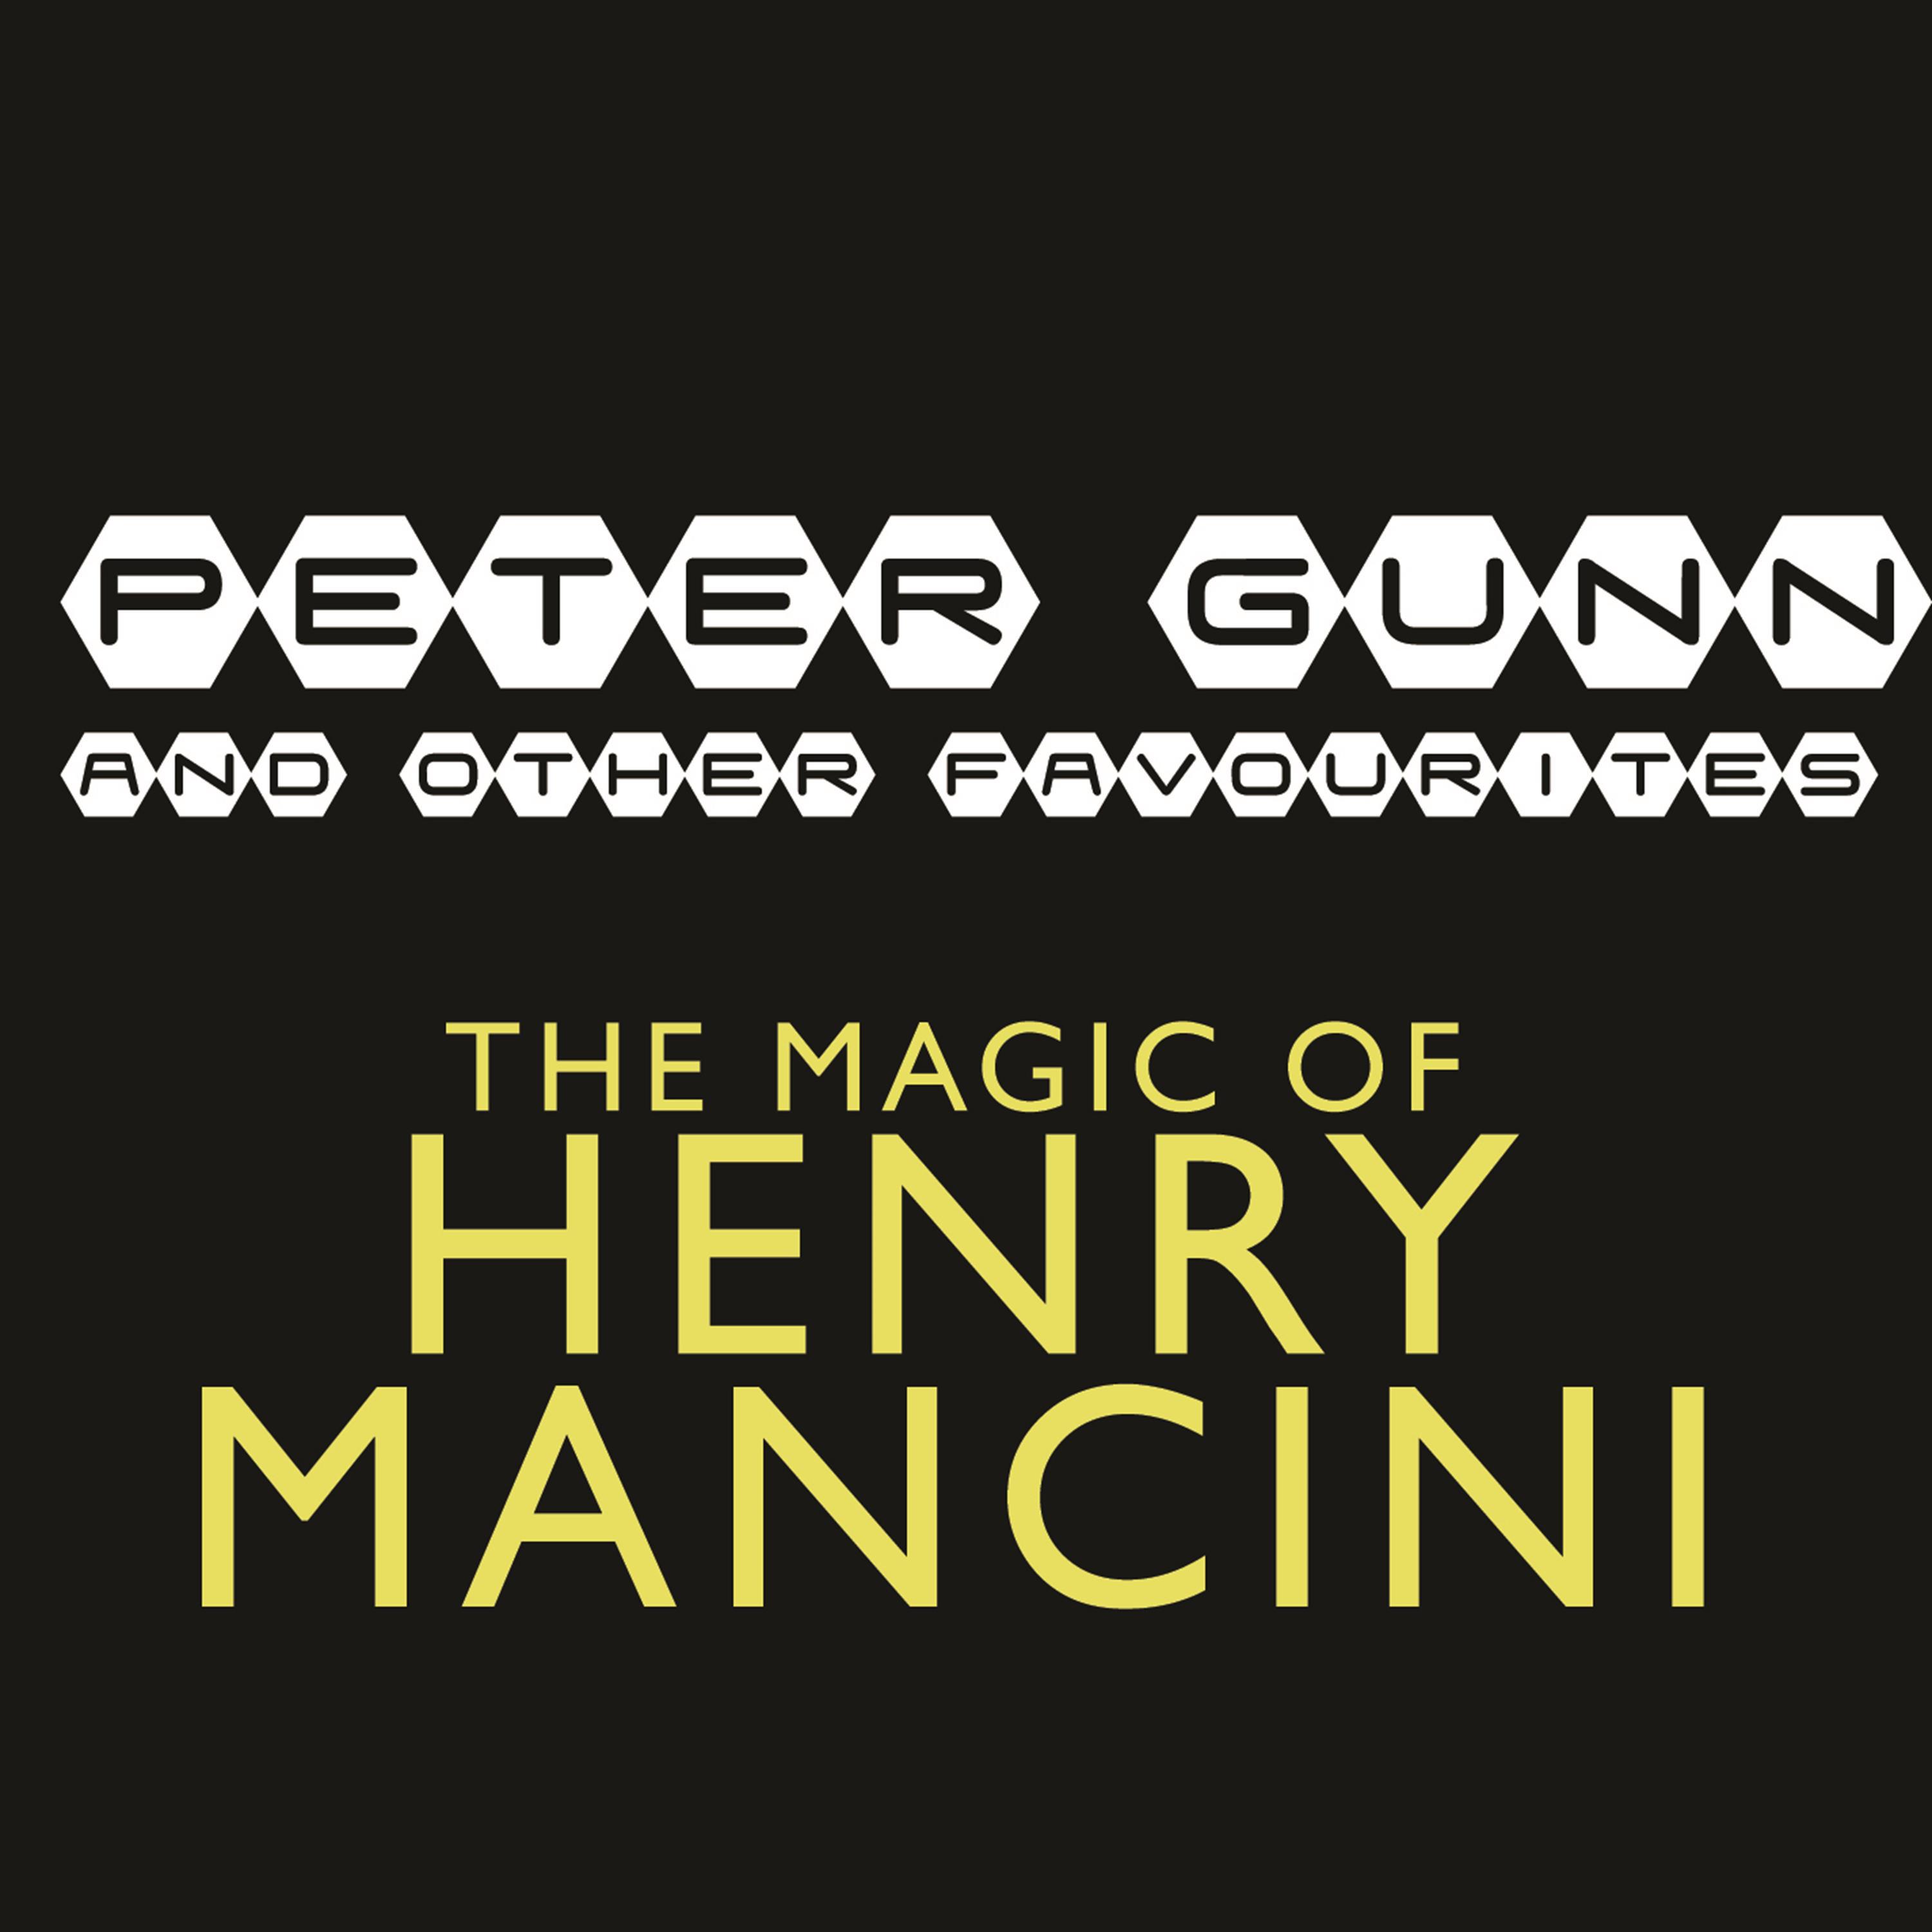 Peter Gunn & Other Favourites - The Magic of Henry Mancini